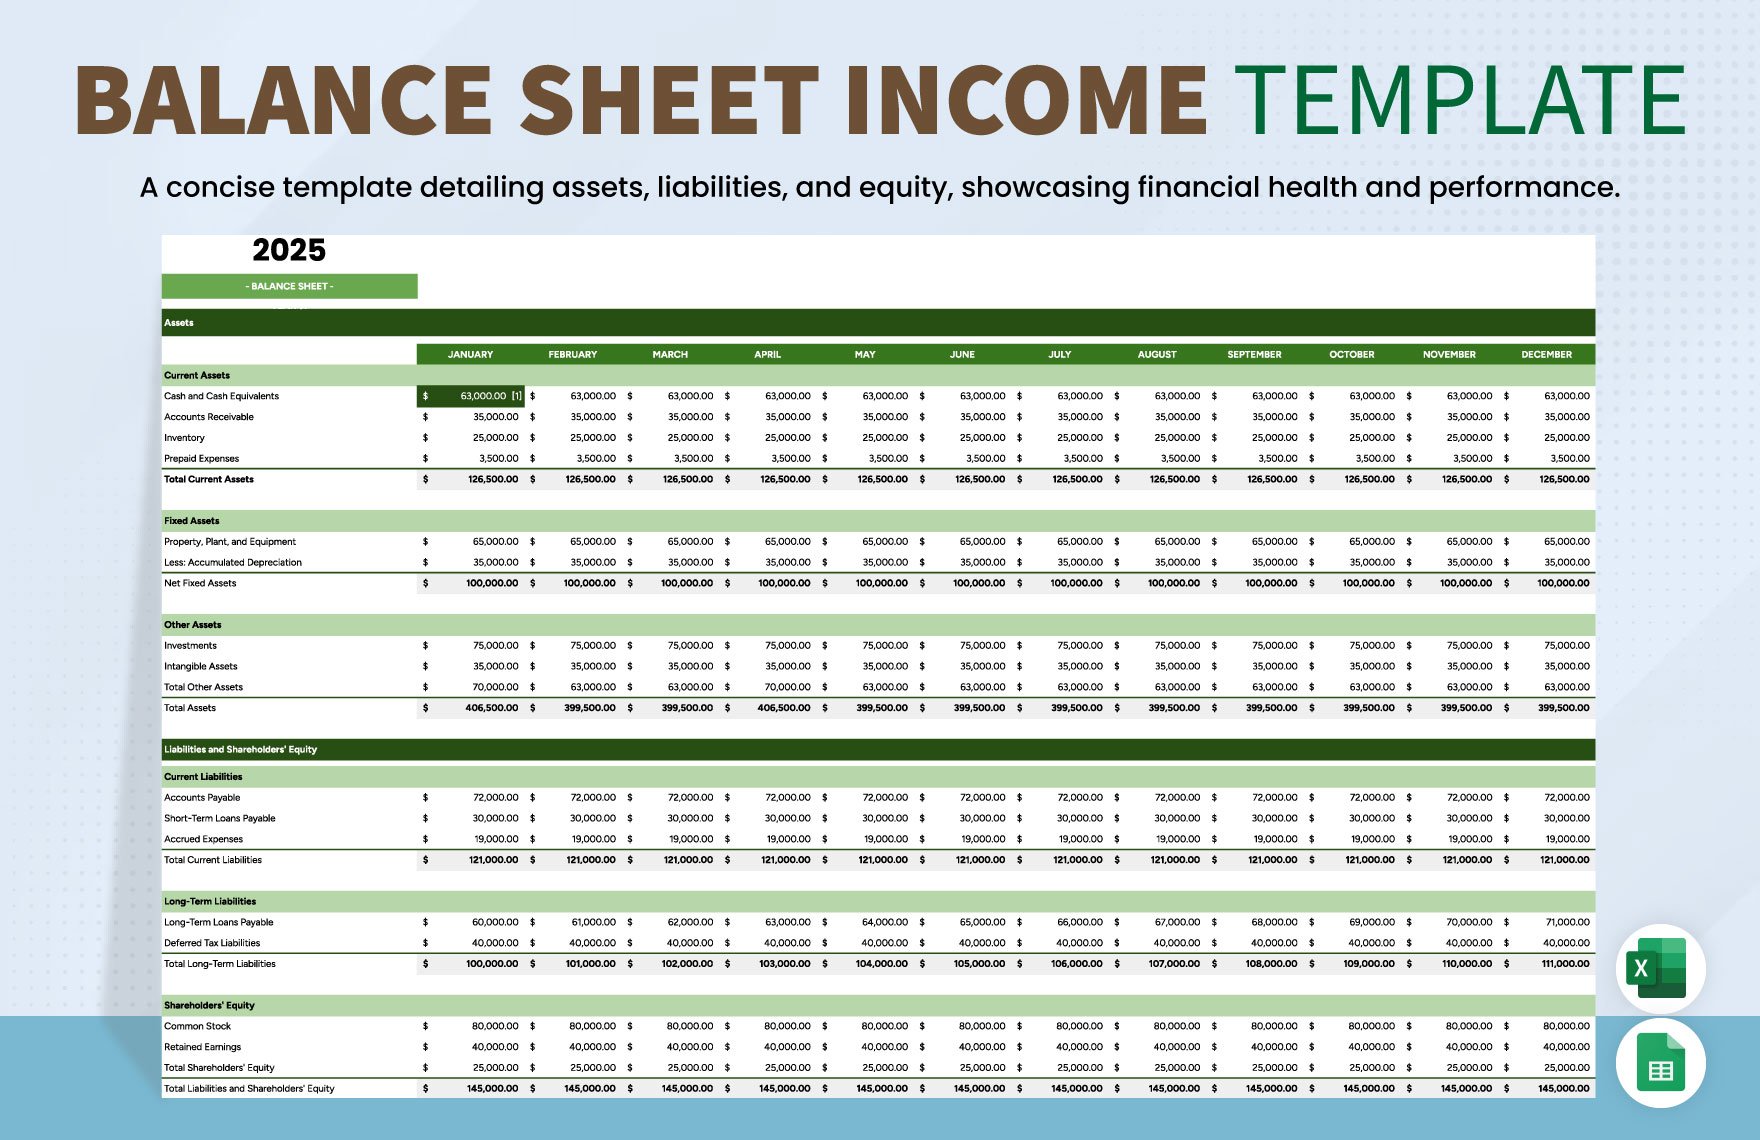 Balance Sheet Income Template in Excel, Google Sheets